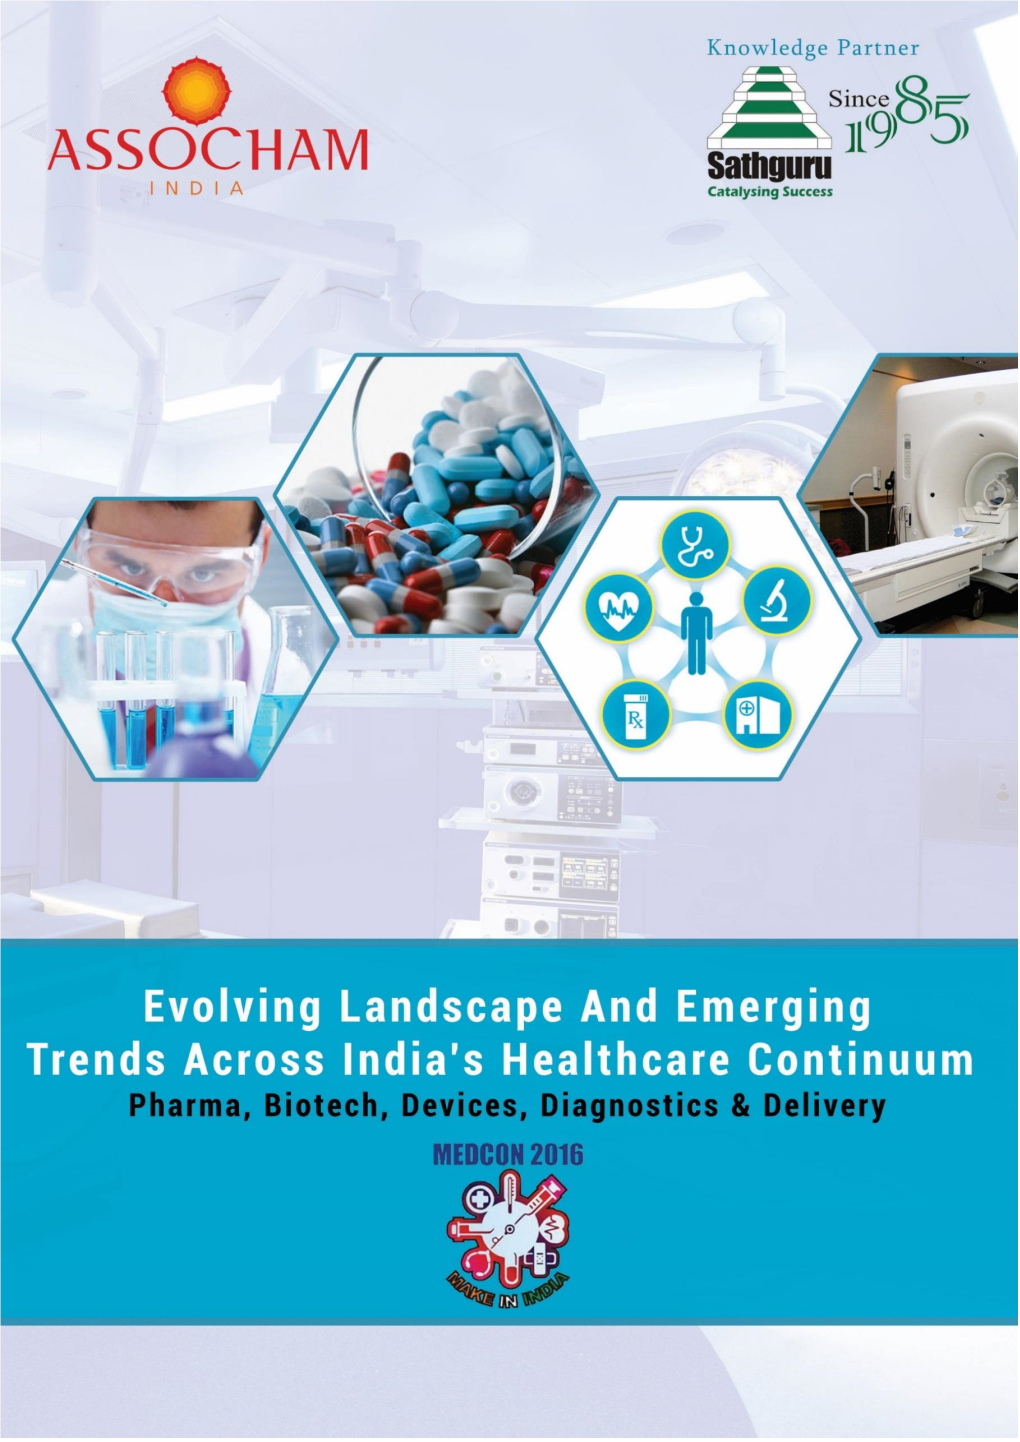 Evolving Landscape and Emerging Trends Across India's Healthcare